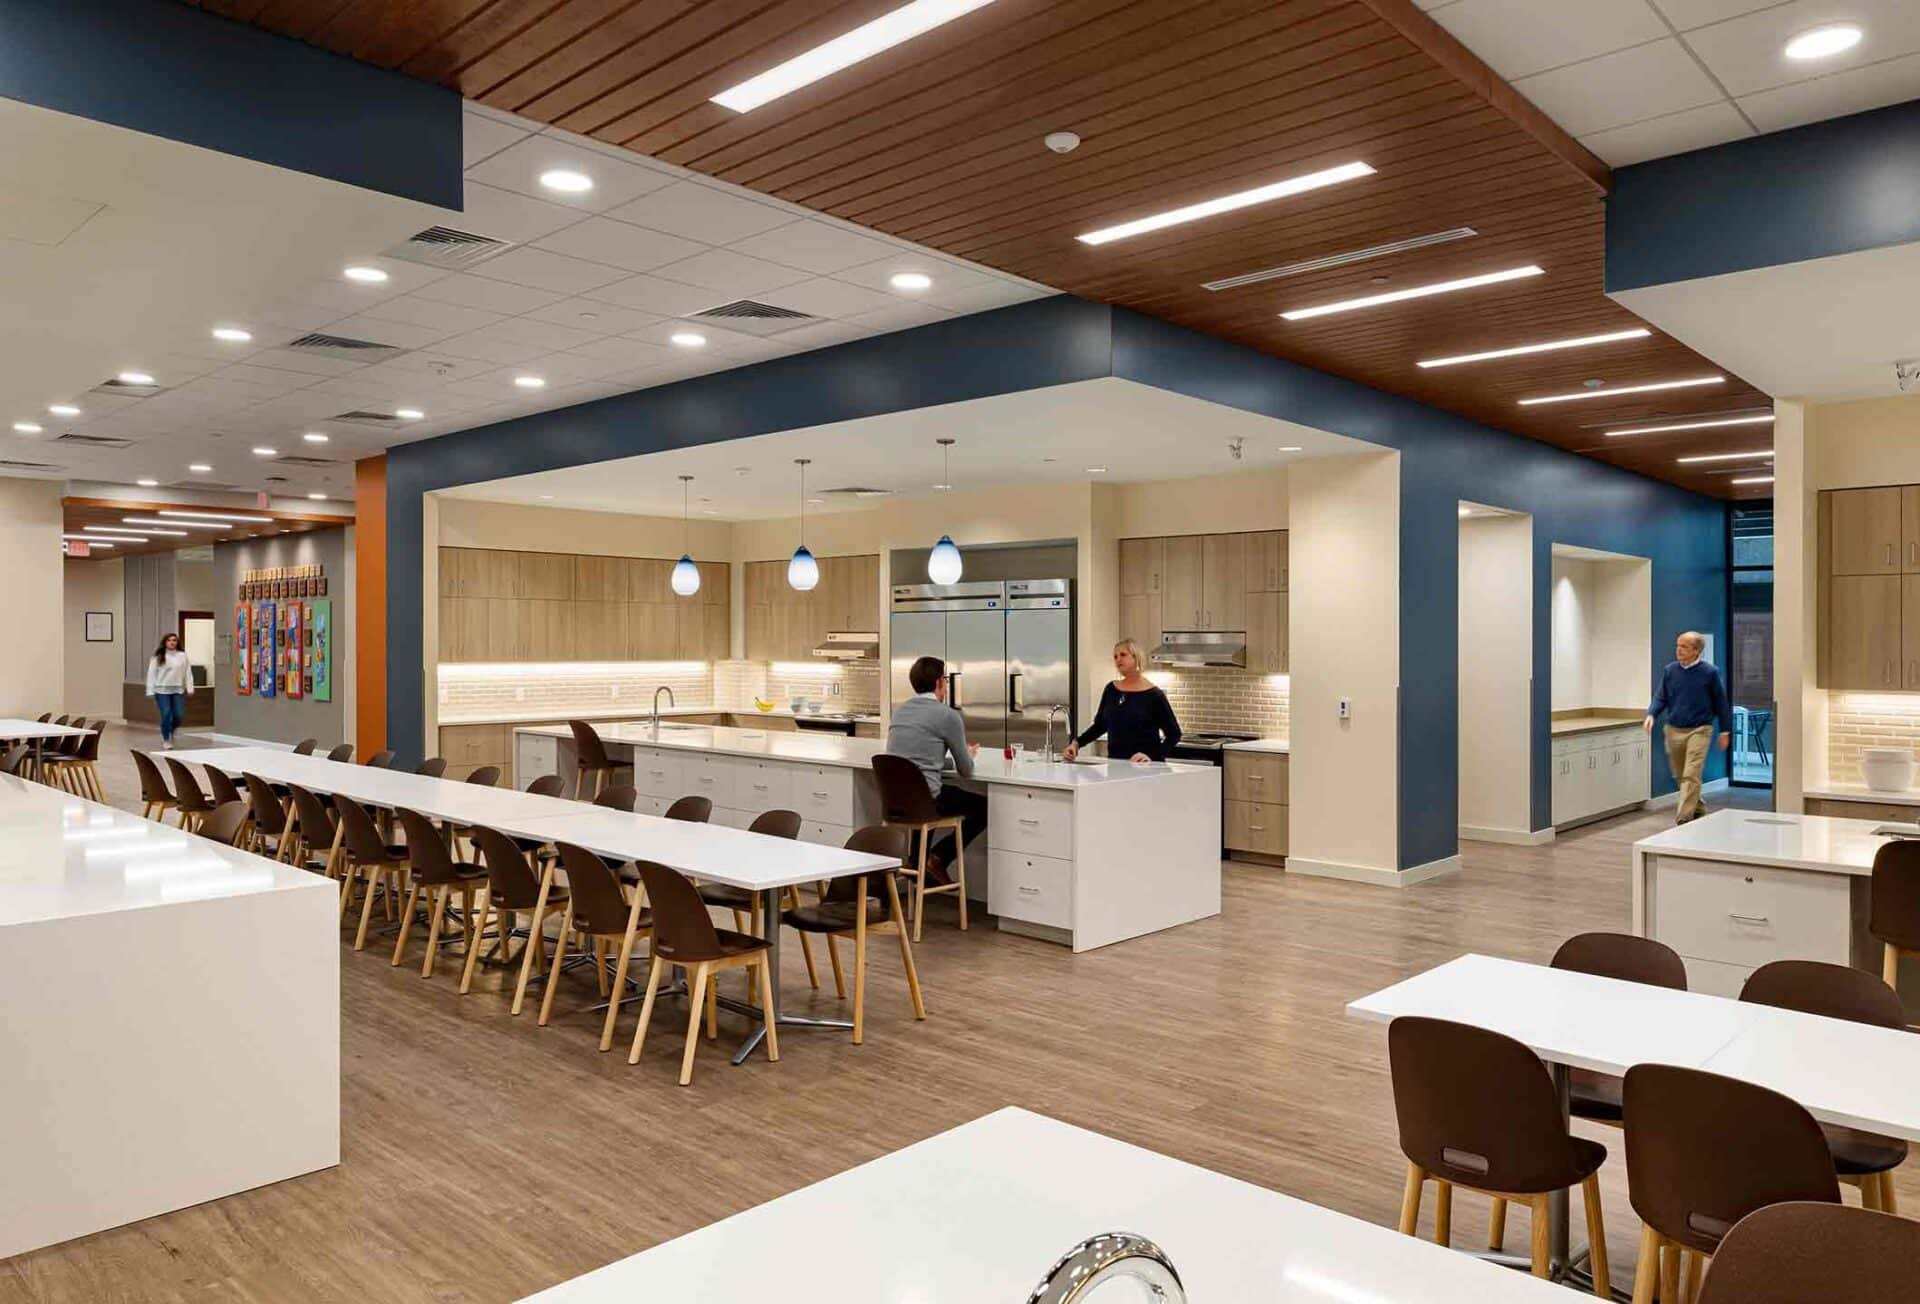 Interior of American Cancer Society Hope Lodge Building - Designed by Trivers Architectural Firm